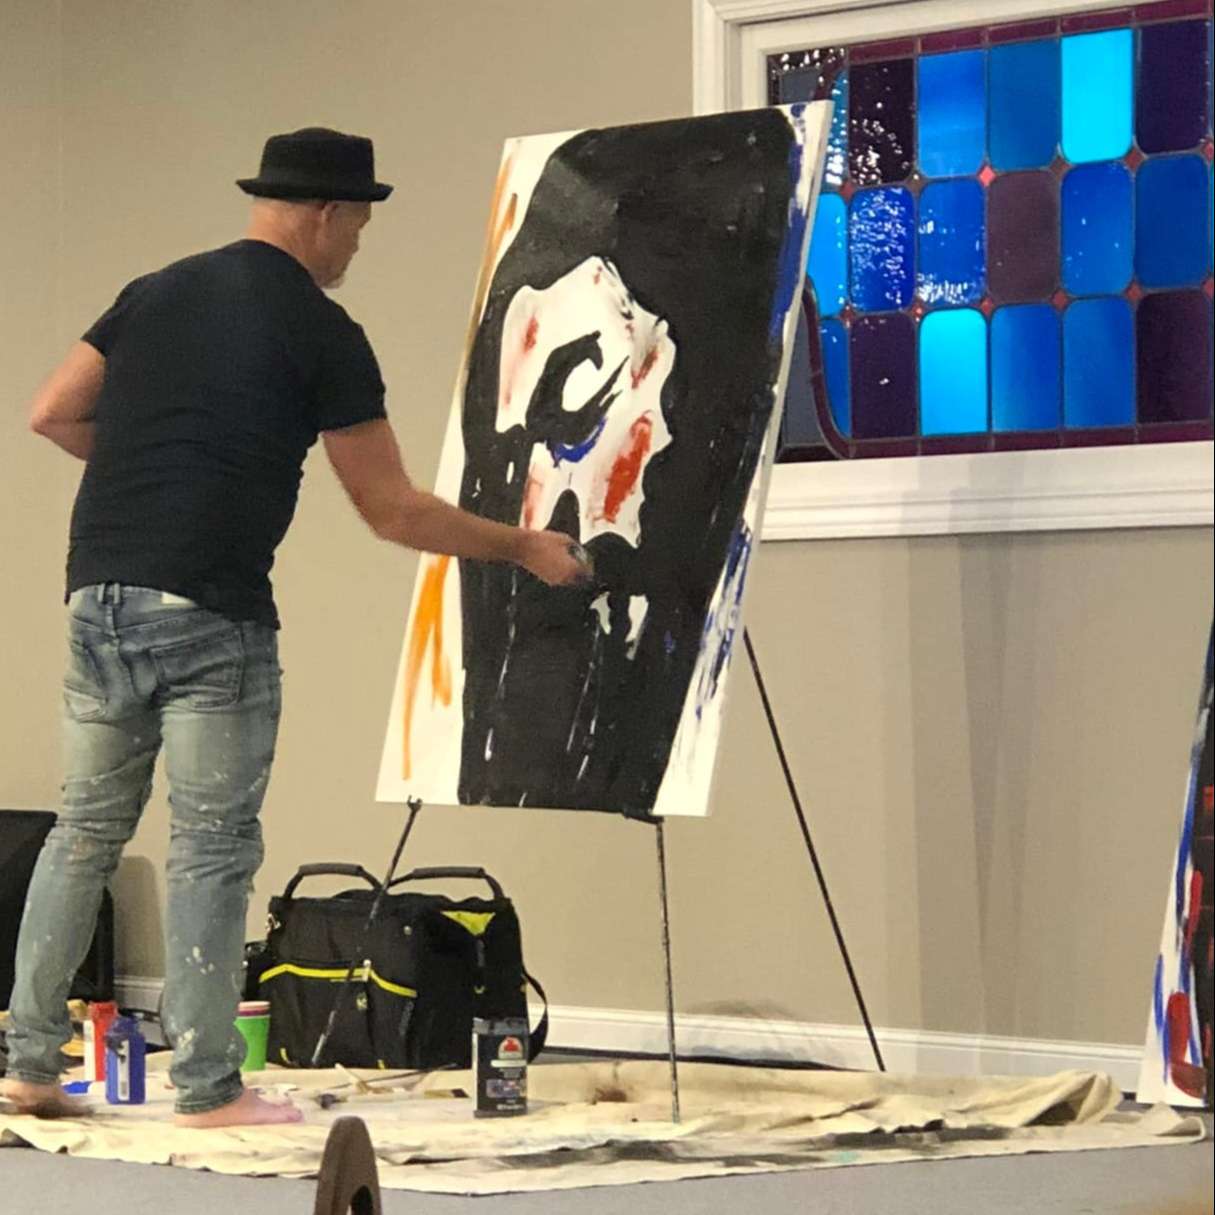 man in black derby hat, black tee shirt, and jeans, barefoot on dropcloth paints an image of Jesus Christ on a large canvas